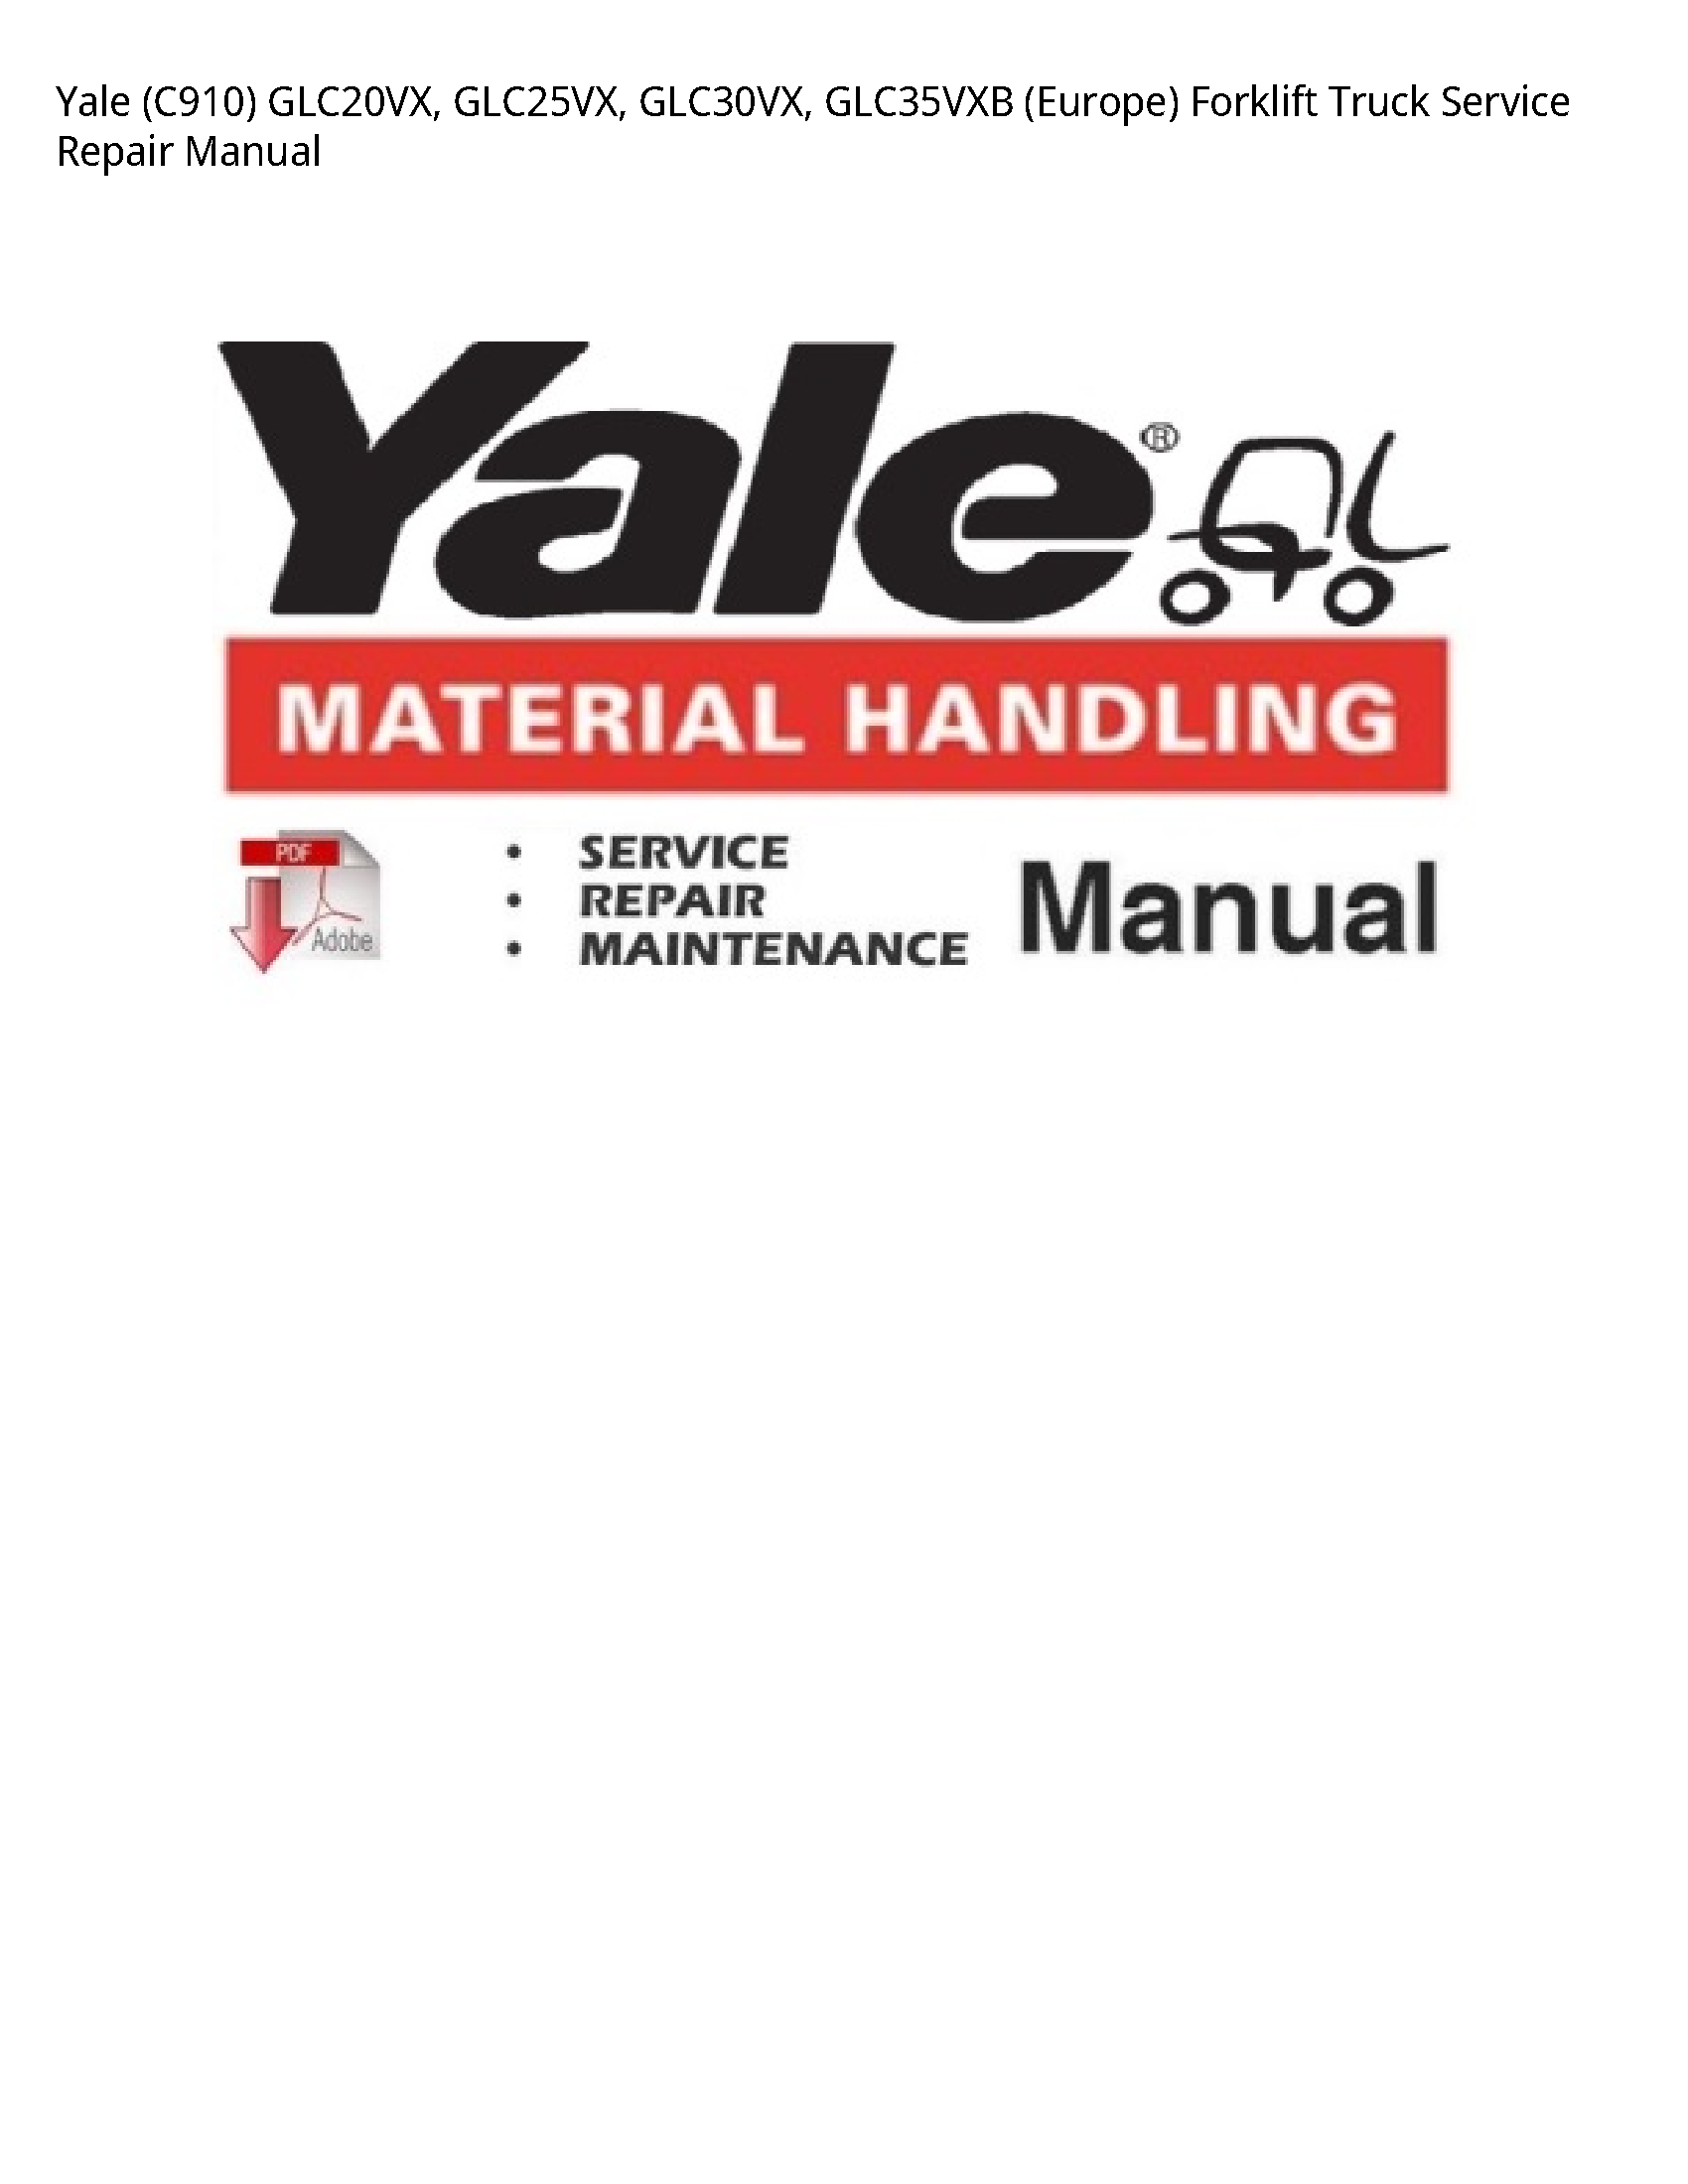 Yale (C910) (Europe) Forklift Truck manual